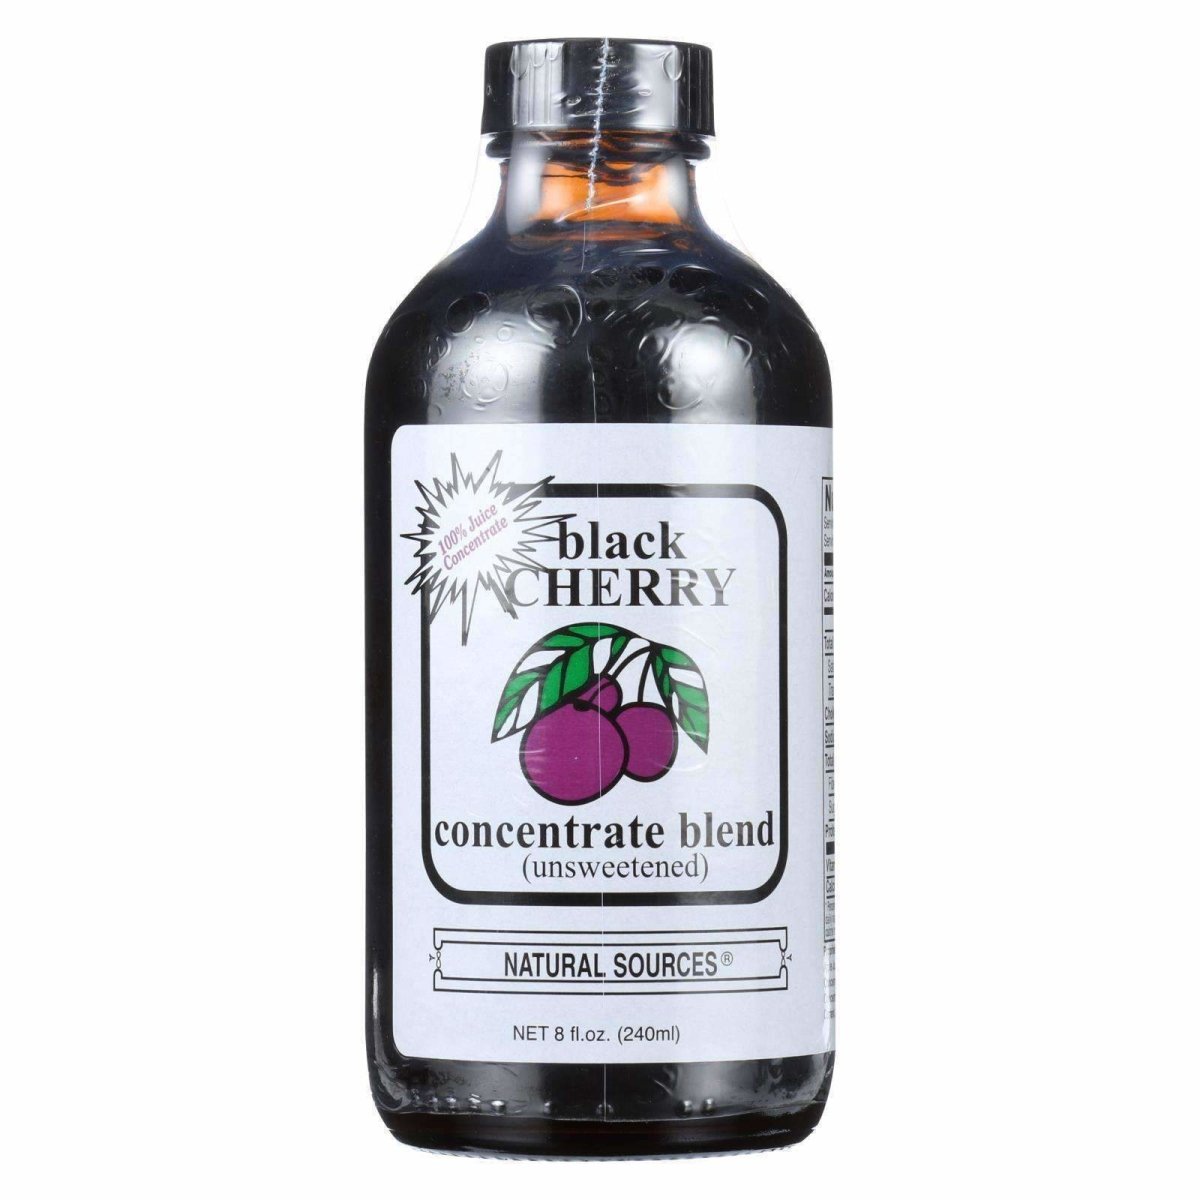 Black Cherry Concentrated Blend 8 Oz